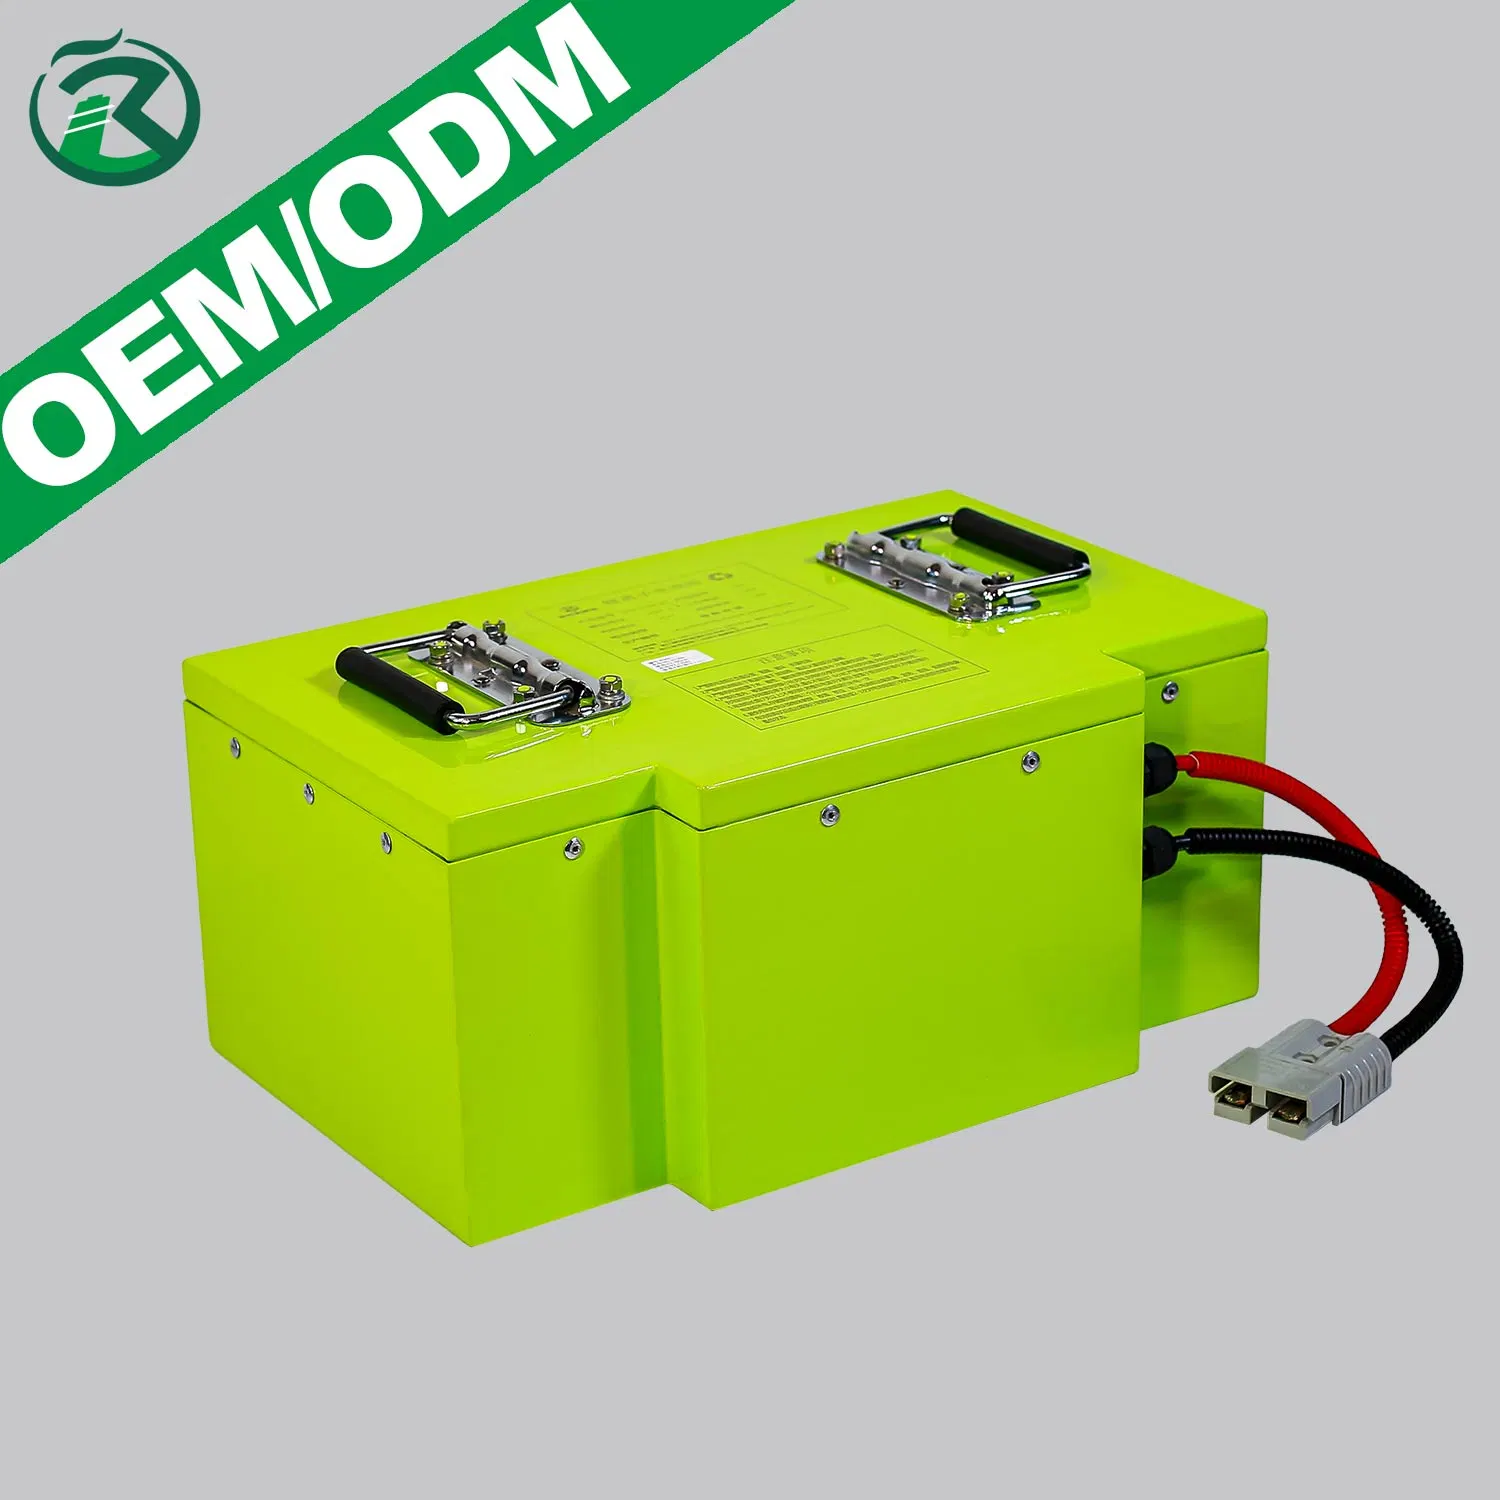 24V 60V 72V 100ah Lipo Battery for Electric Bicycle Motorcycle Tricycle Low Speed Vehicle